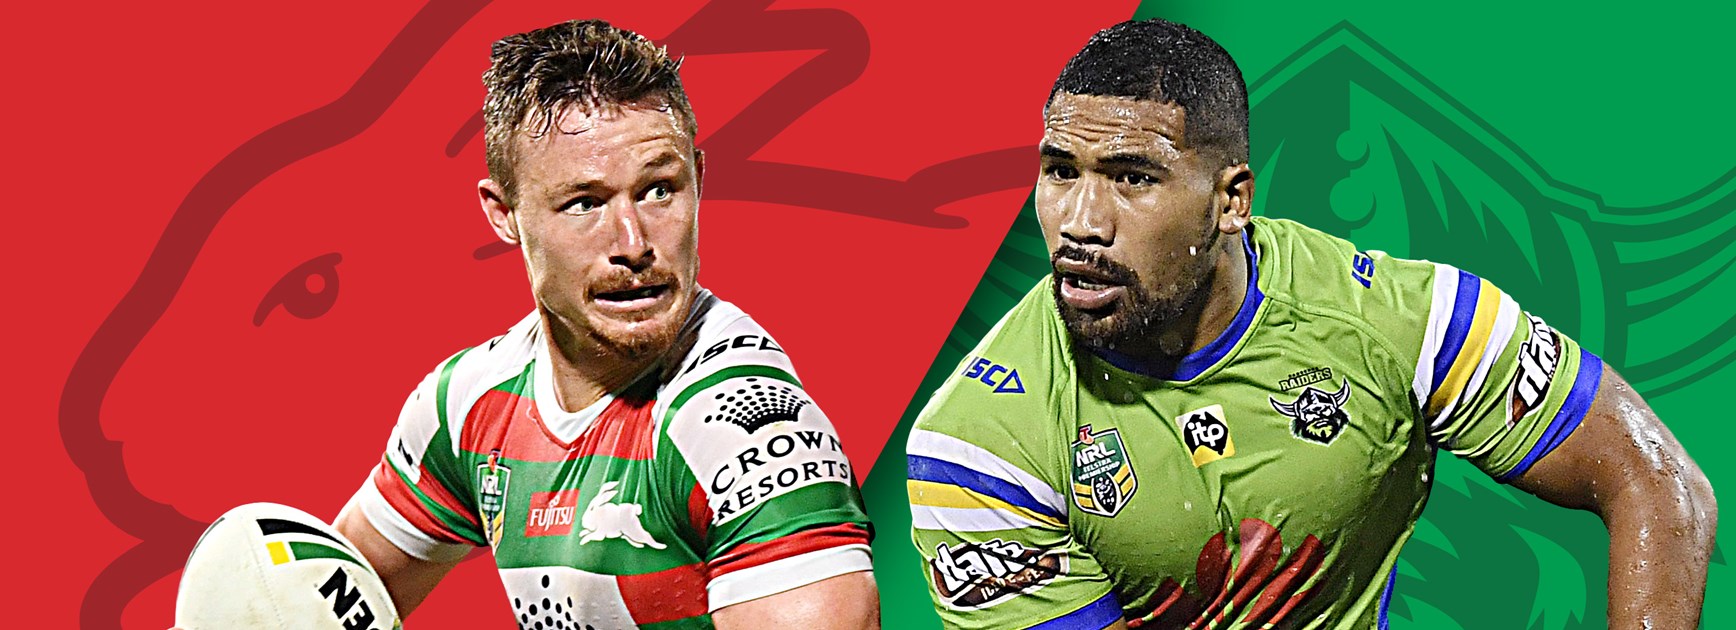 Rabbitohs v Raiders: Burgess back, Murray out against unchanged Raiders